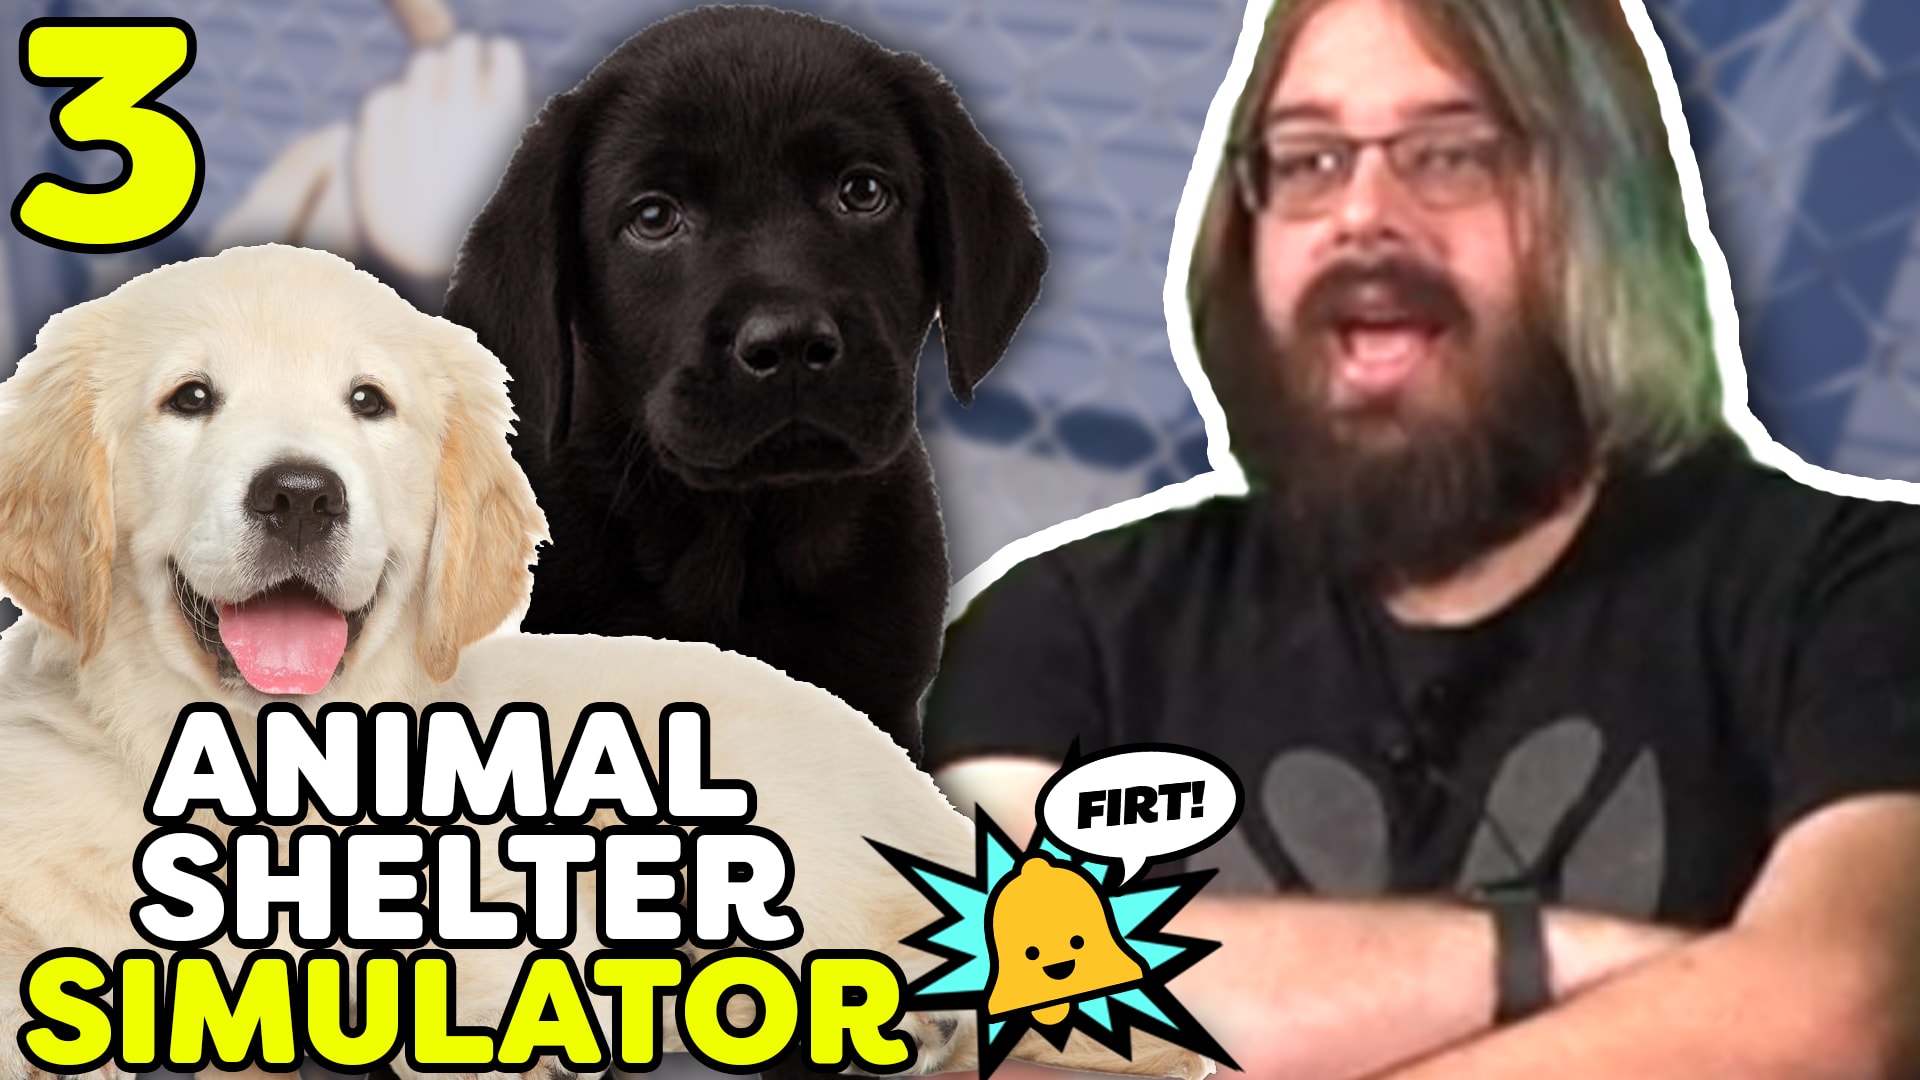 Can We Keep Two Puppies Alive? - Animal Shelter Simulator (#3) - Rooster  Teeth